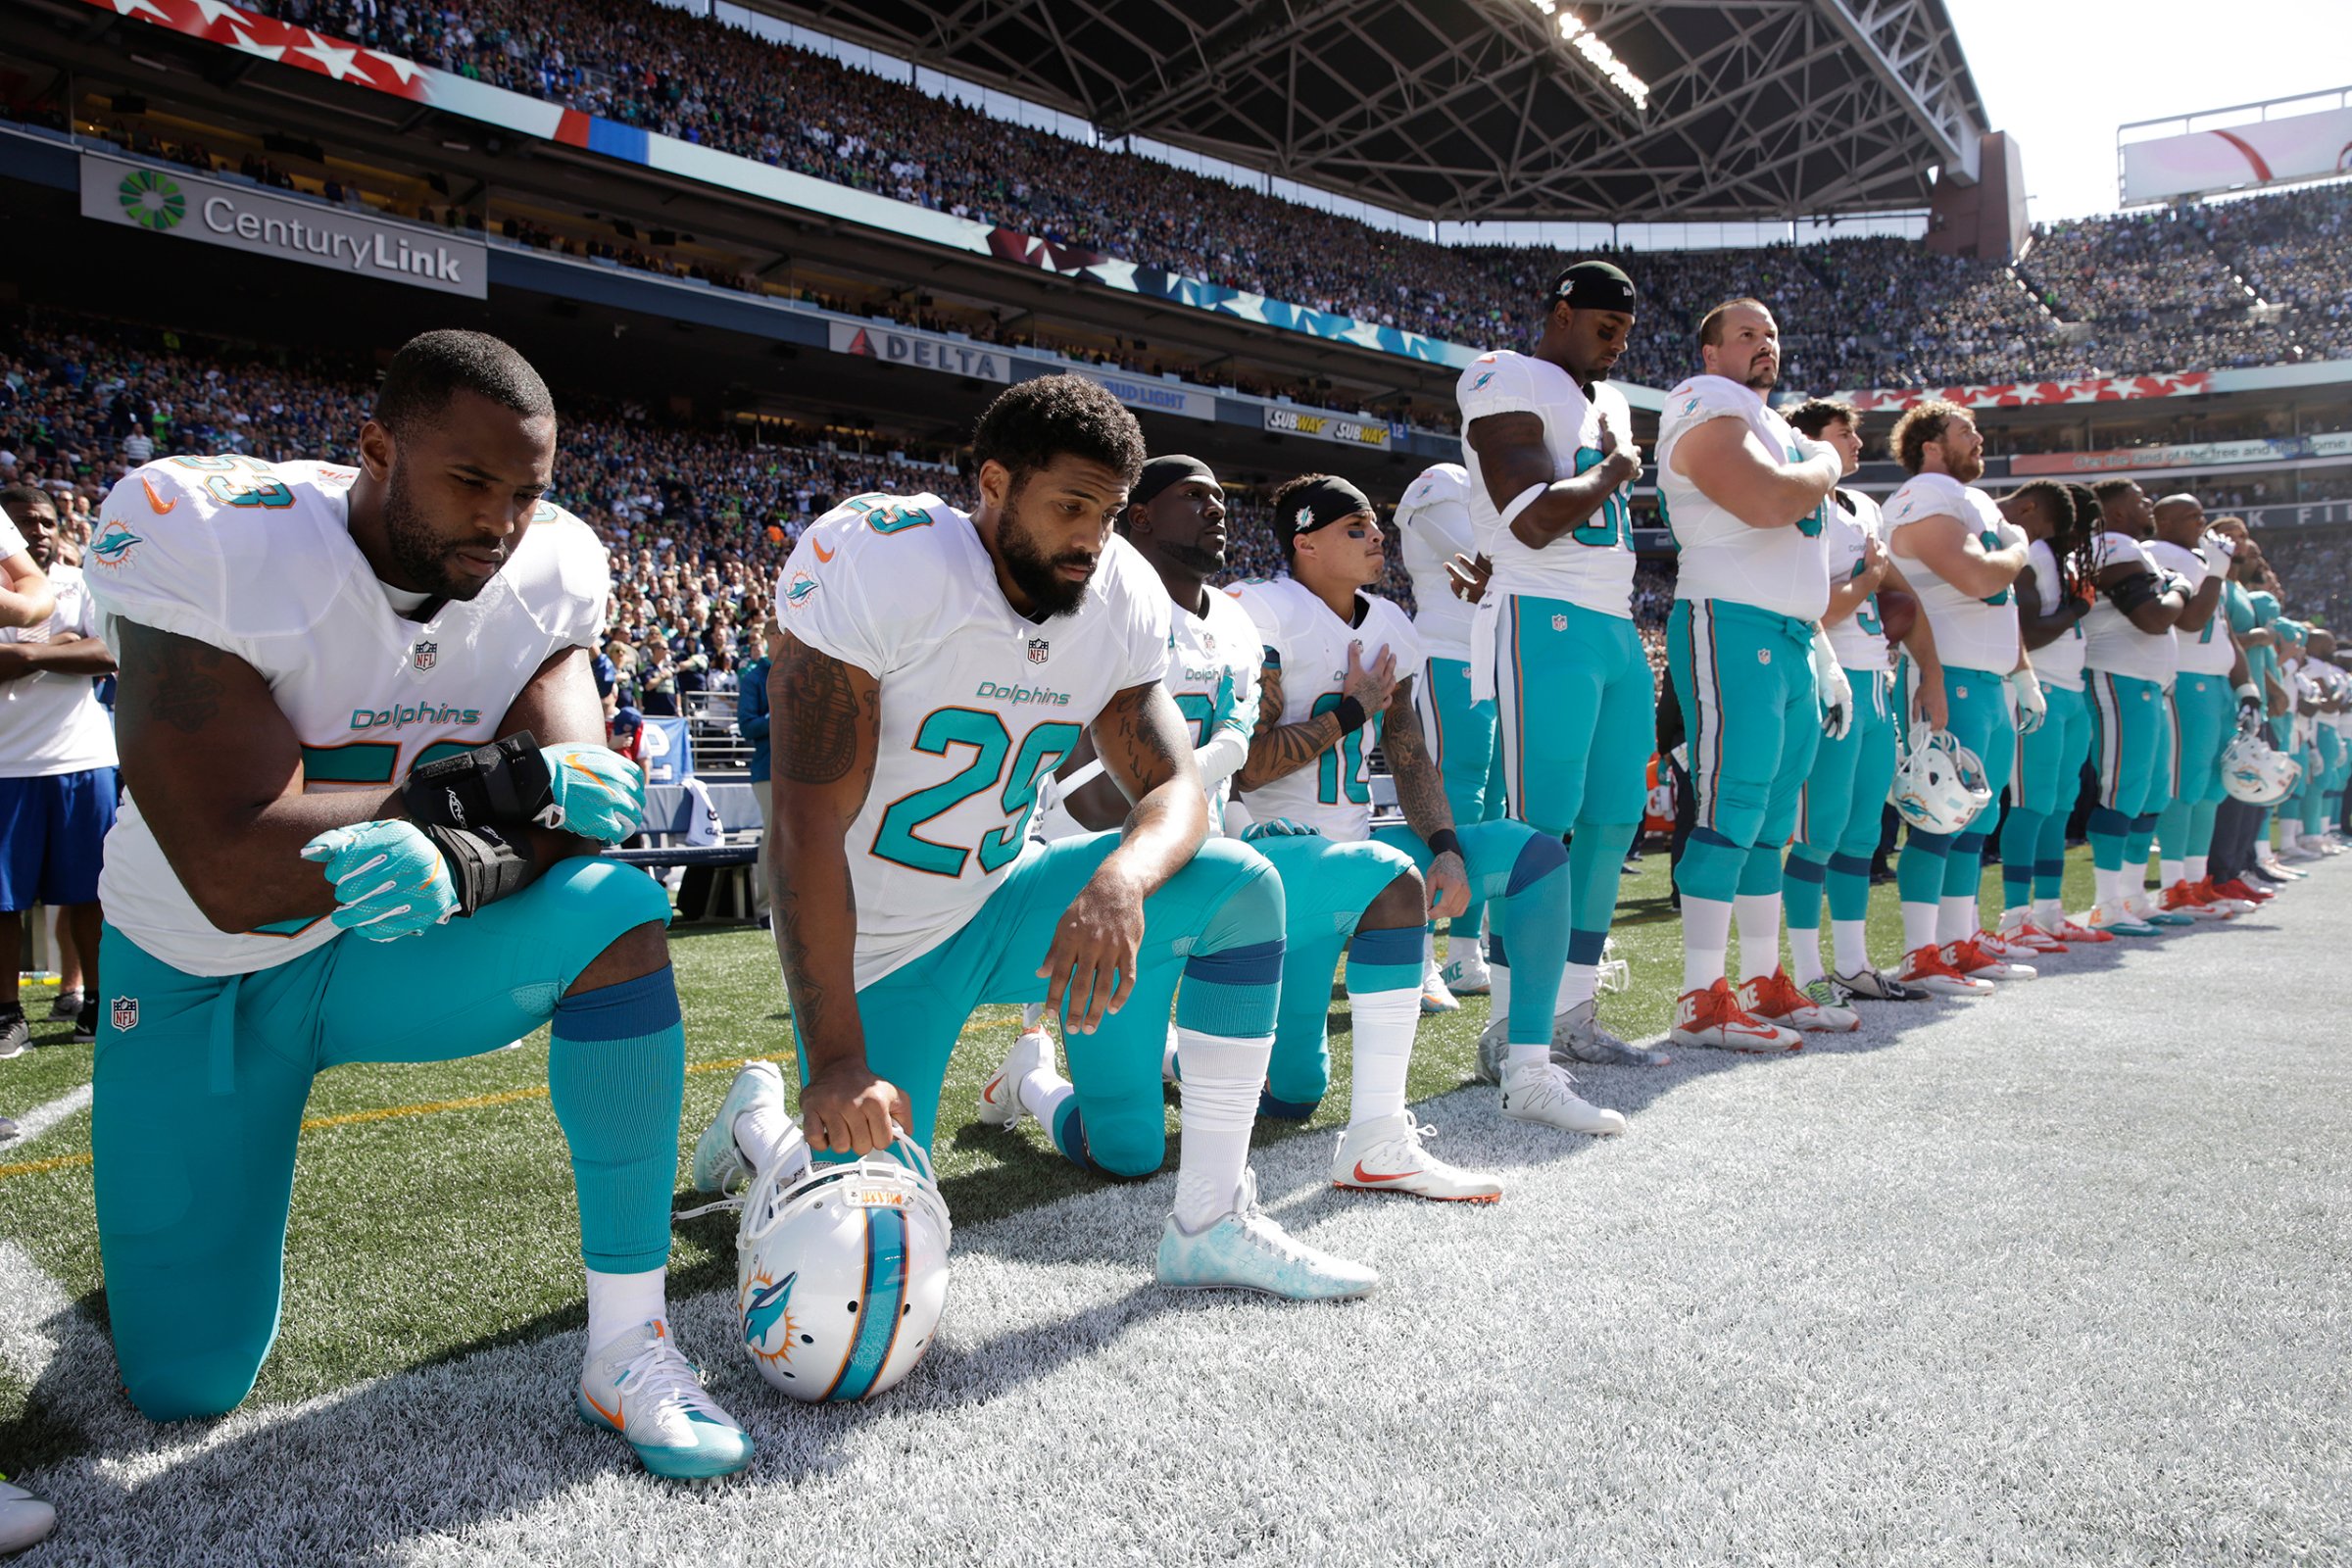 Jelani Jenkins, Arian Foster, Michael Thomas, and Kenny Stills of the Miami Dolphins kneel during the singing of the national anthem before a game against the Seattle Seahawks in Seattle on Sept. 11, 2016.